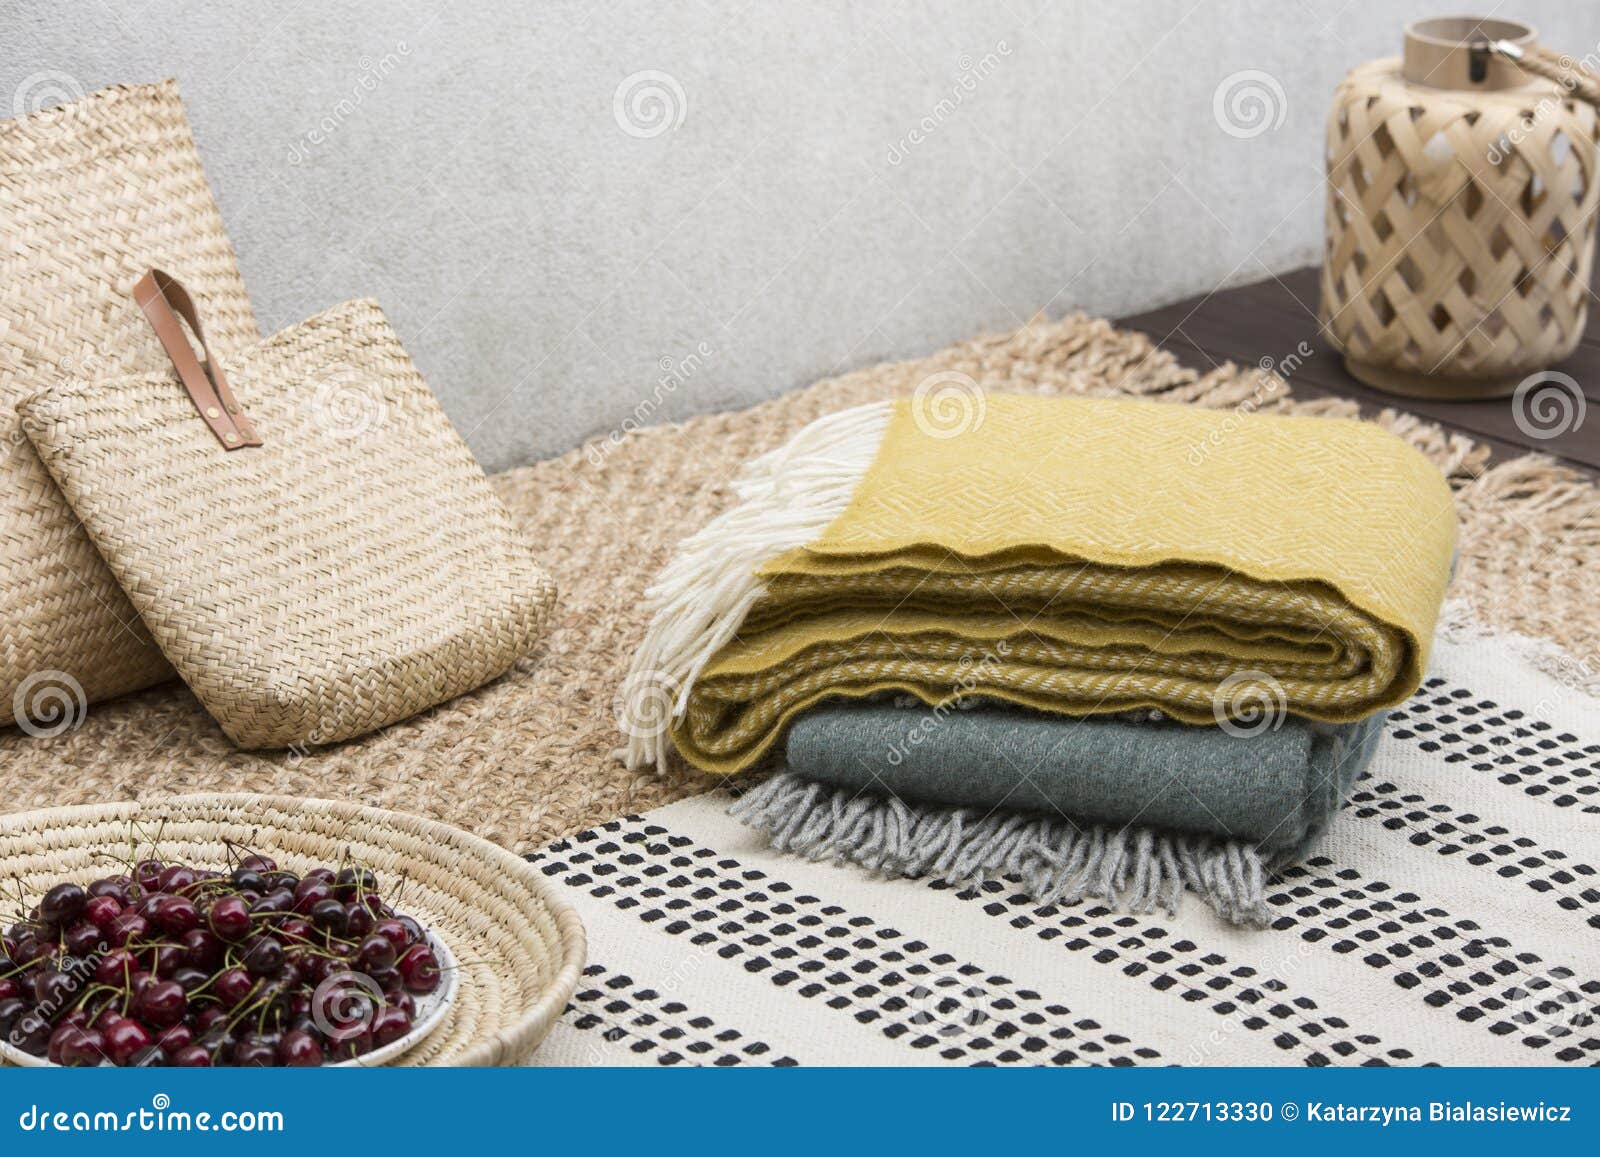 blankets and rattan bags on table with cherries on the terrace of house. real photo